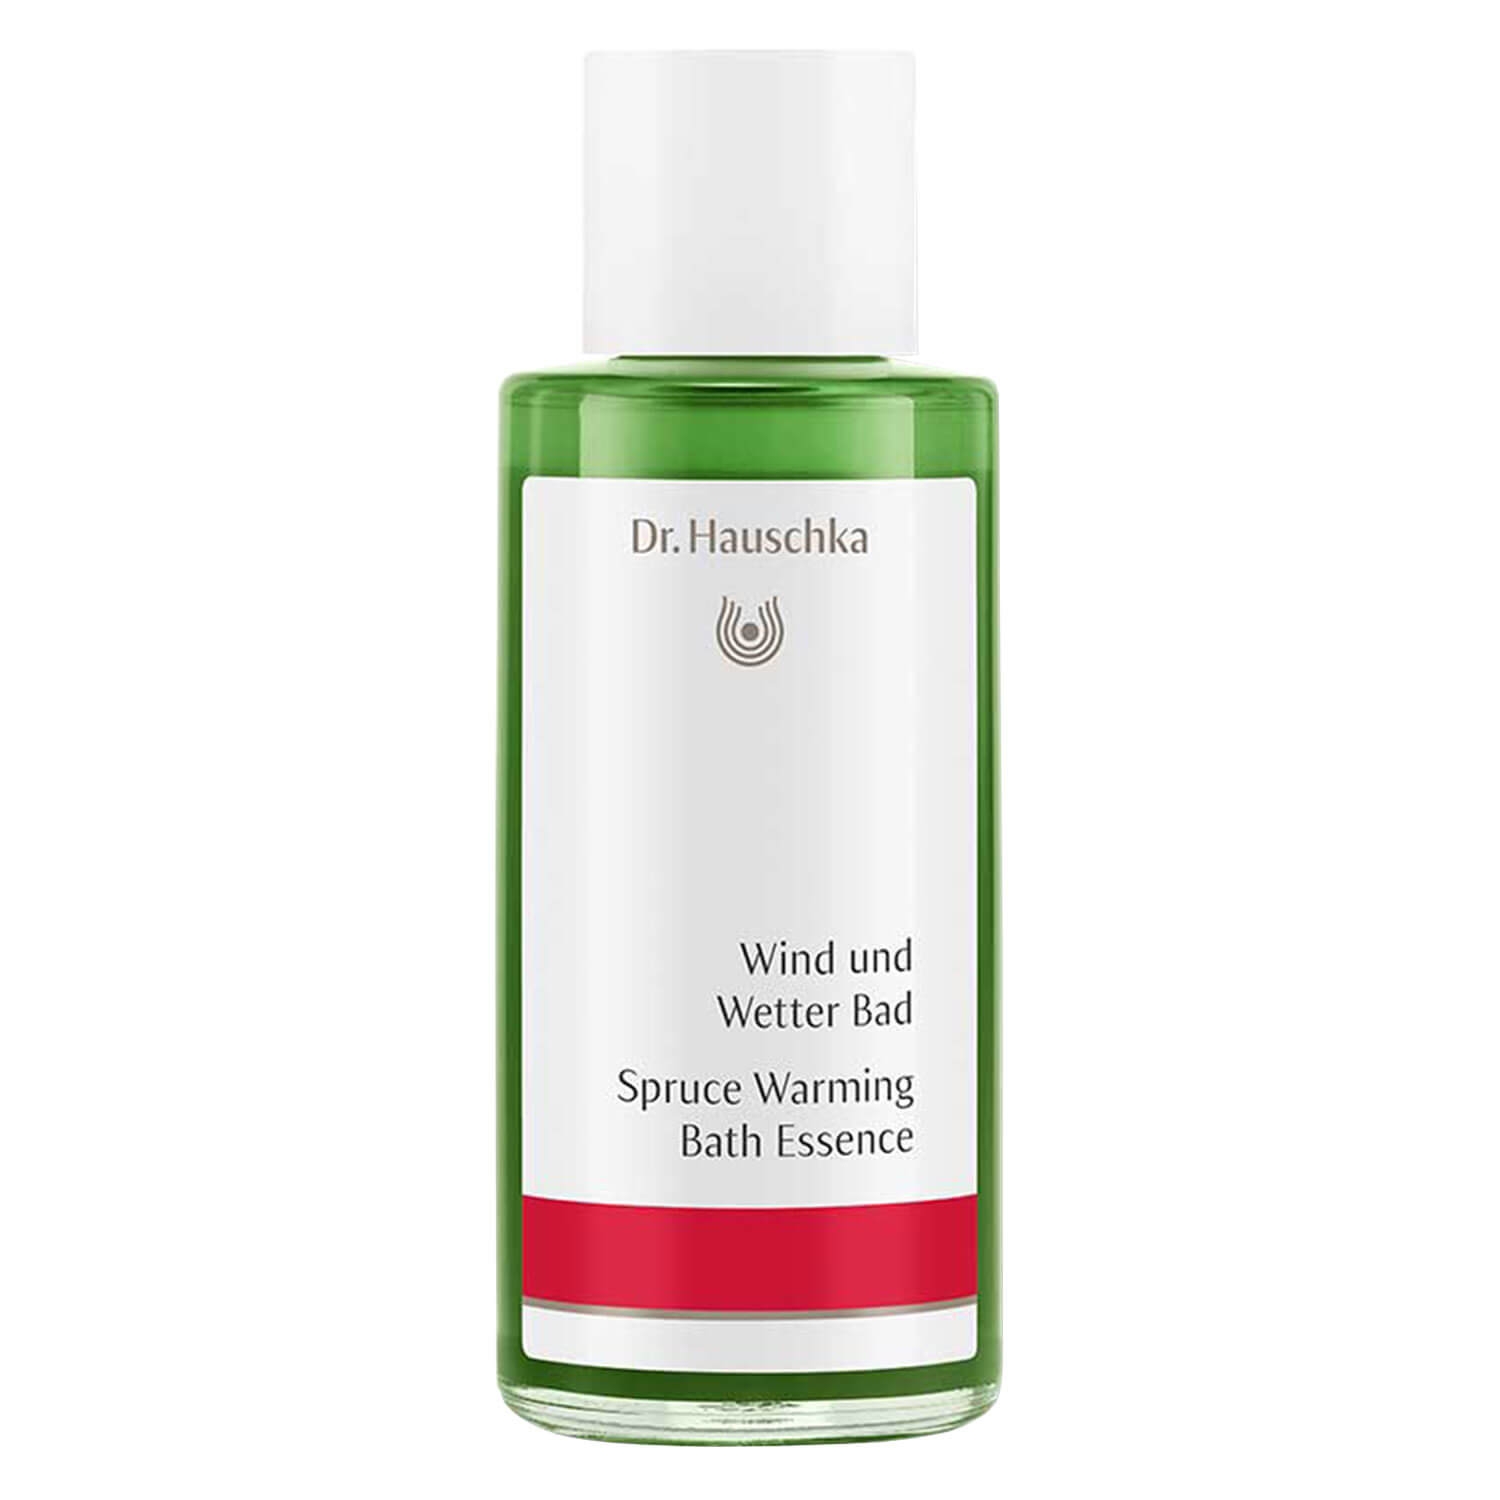 Product image from Dr. Hauschka - Wind und Wetter Bad